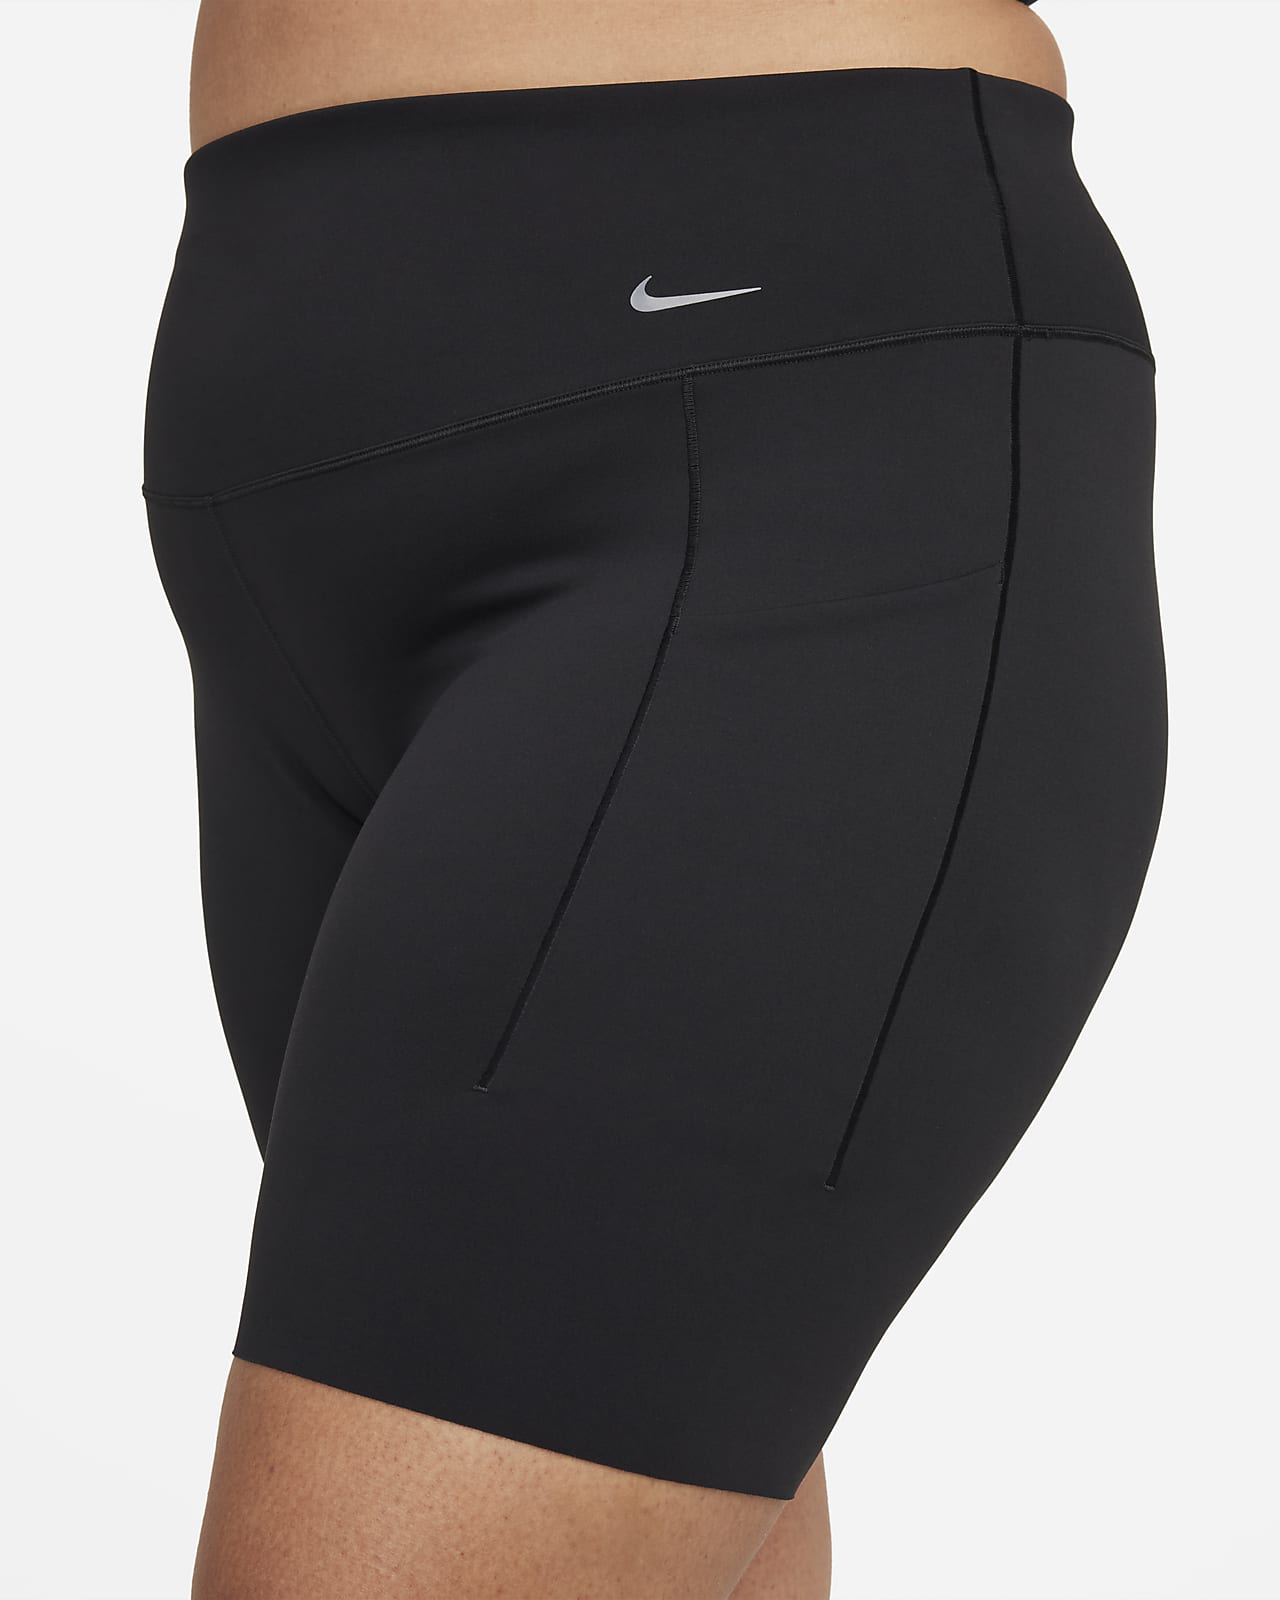 https://static.nike.com/a/images/t_PDP_1280_v1/f_auto,q_auto:eco/9d0aa85f-6656-4117-881b-149f0bd7f910/universa-womens-medium-support-high-waisted-8-biker-shorts-with-pockets-plus-size-ZlWzW4.png